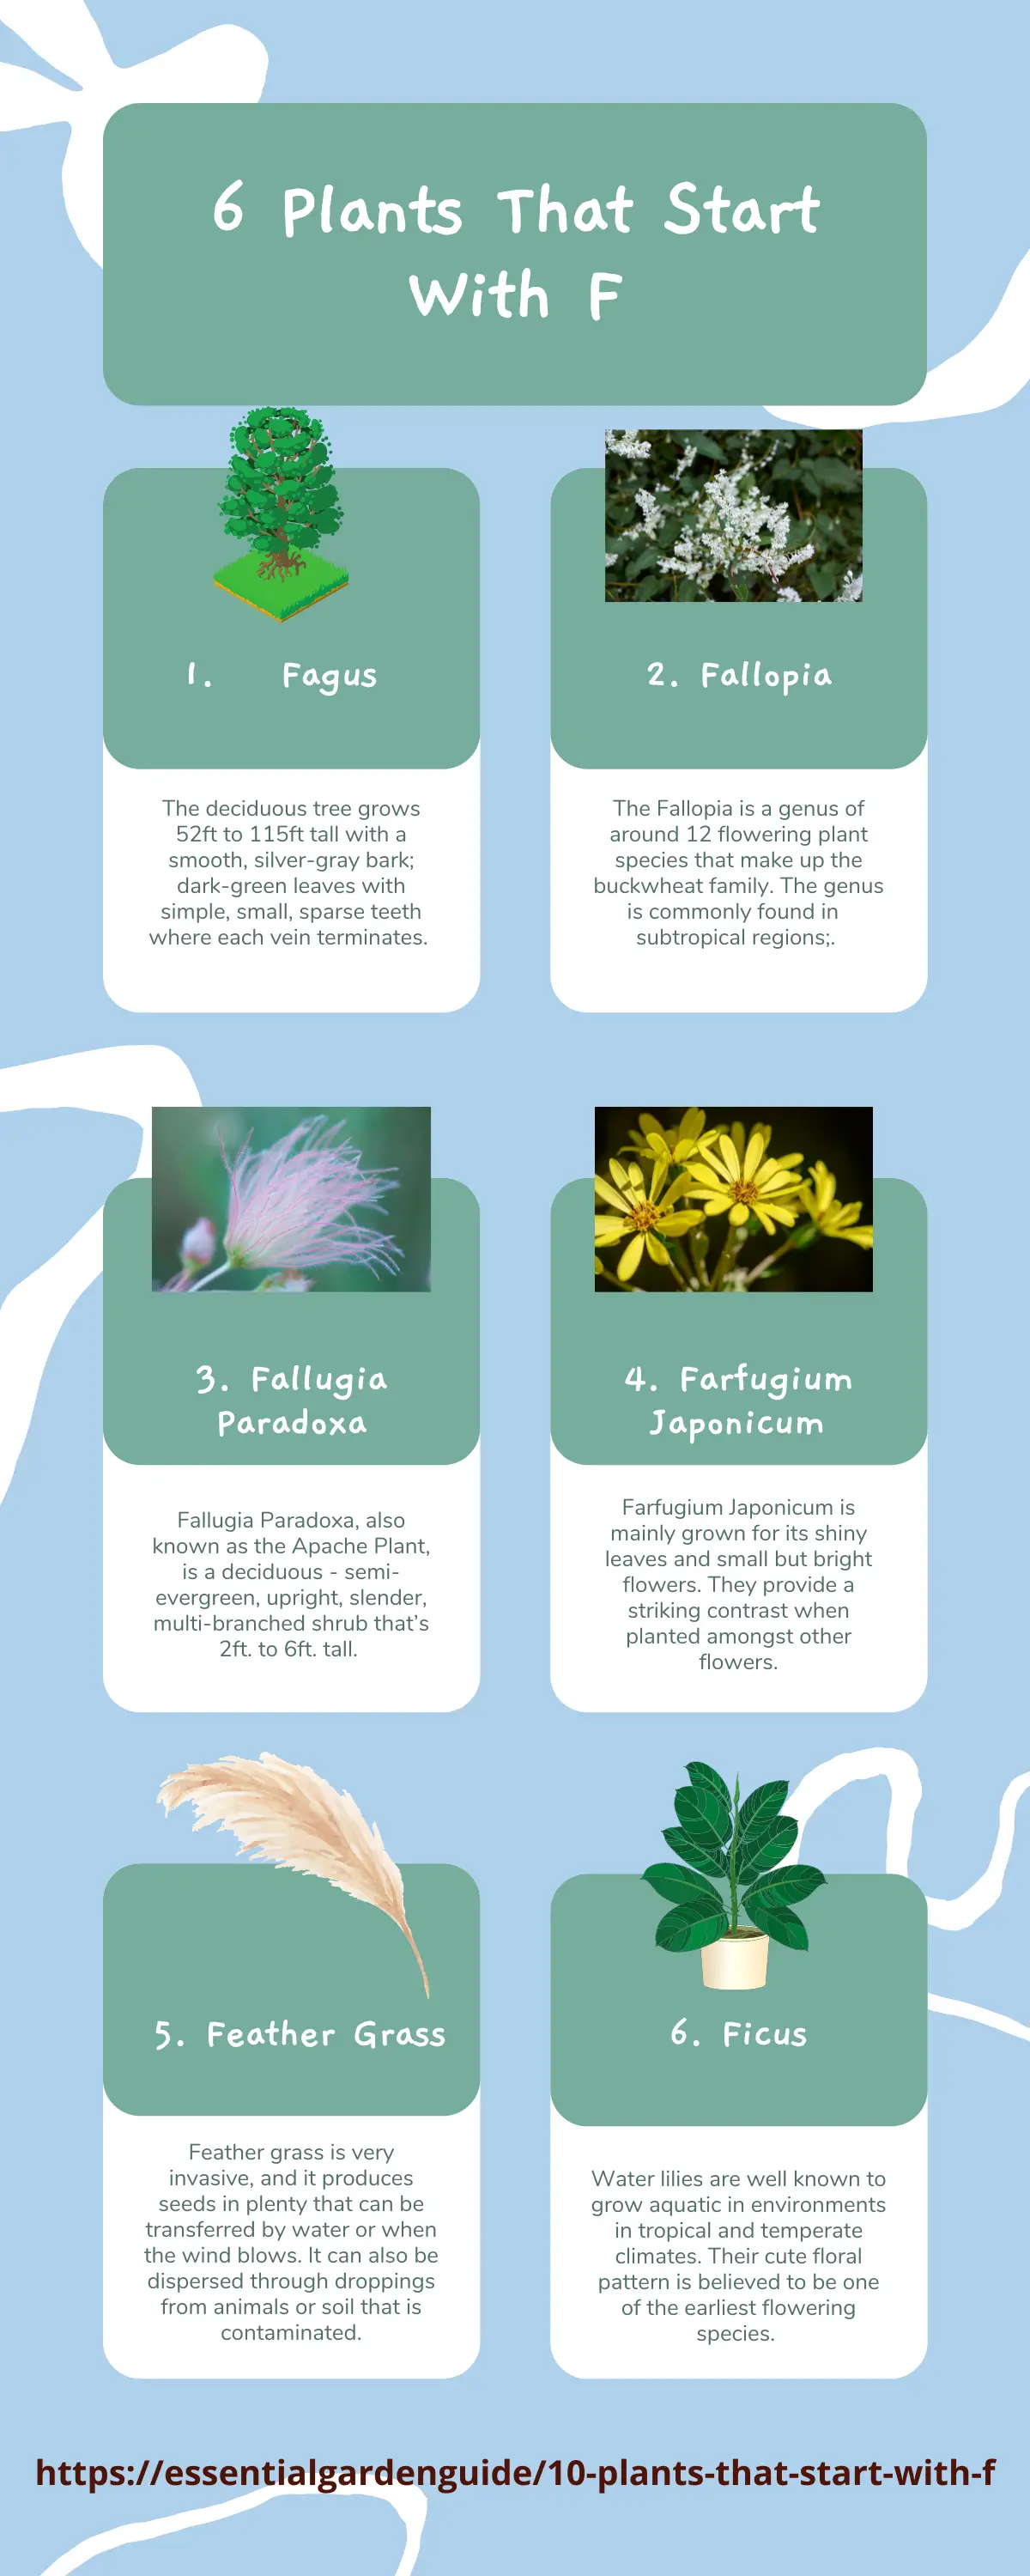 6 popular plants that start with F